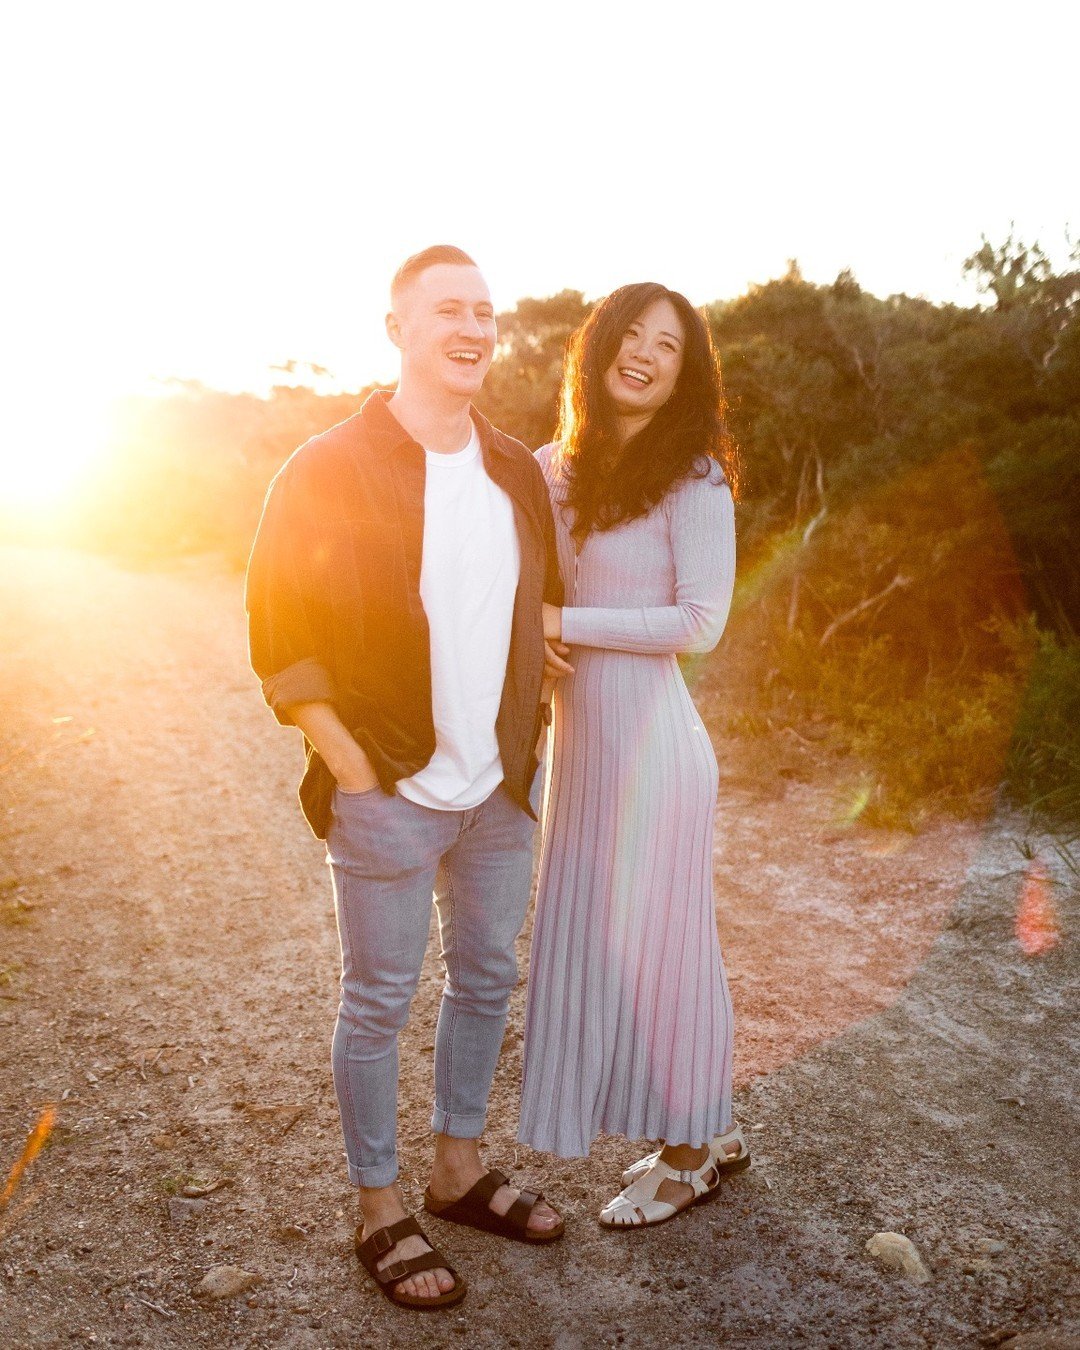 Stunning Xiaoyu + Ben&rsquo;s engagement shoot at golden hour 🌅

Your love deserves to be celebrated with stunning photos! Let&rsquo;s talk about creating magic on your special day. 📸✨

#caitlinamyphotography #centralcoastweddingvenue #centralcoast